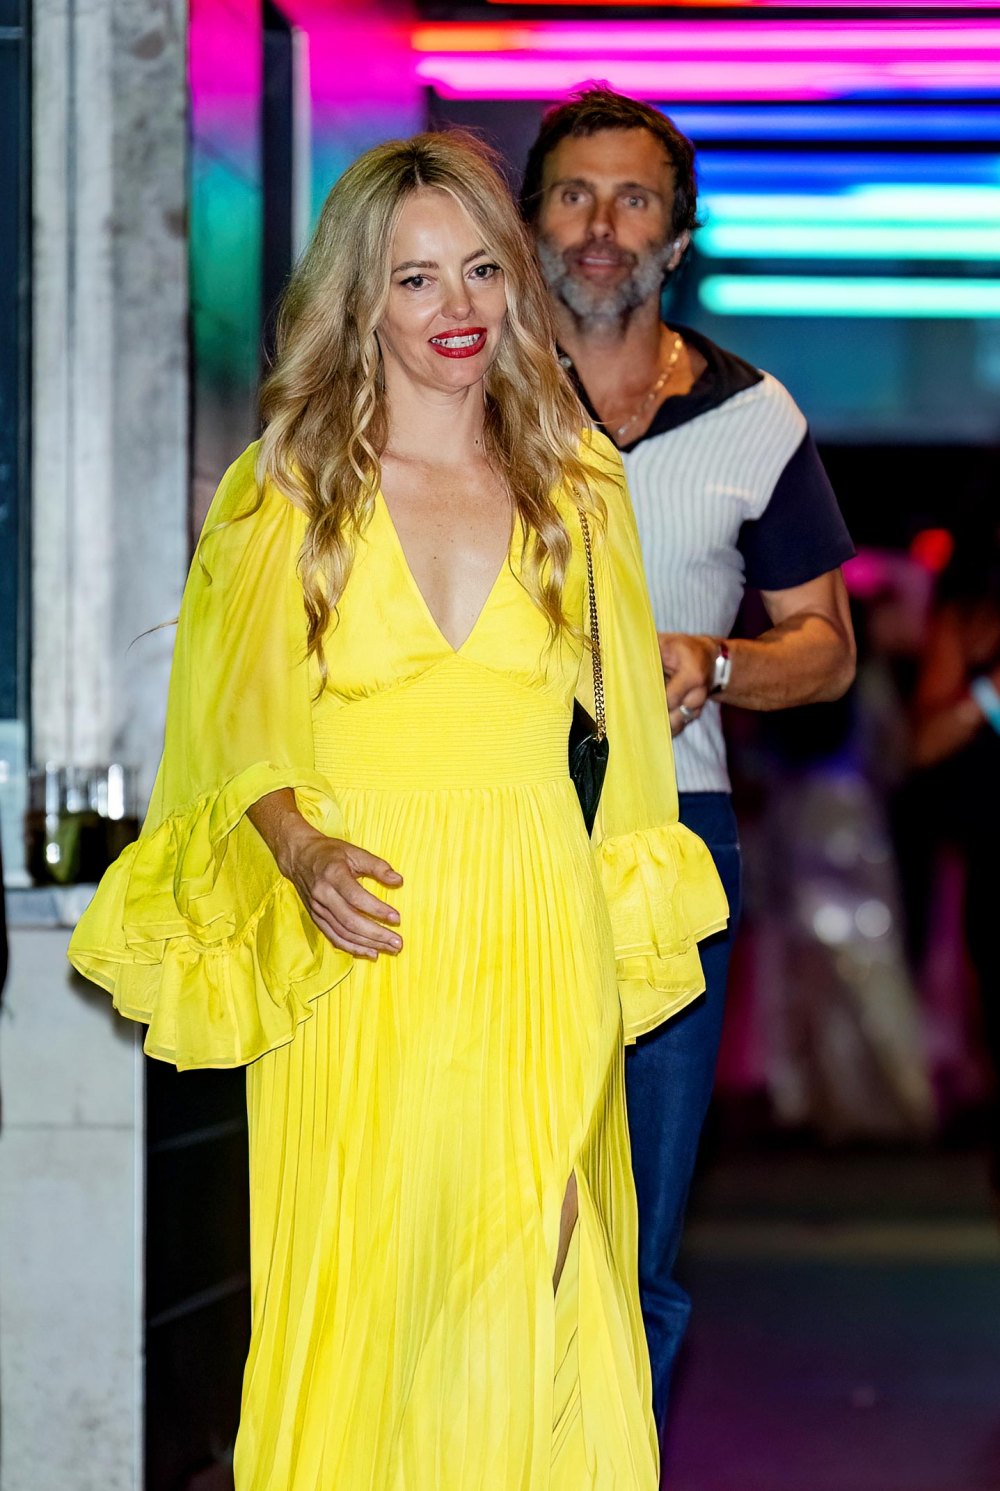 Bijou Phillips and New Boyfriend Jamie Mazur Looked Like an Adorable Couple at NYC Pride Event 730